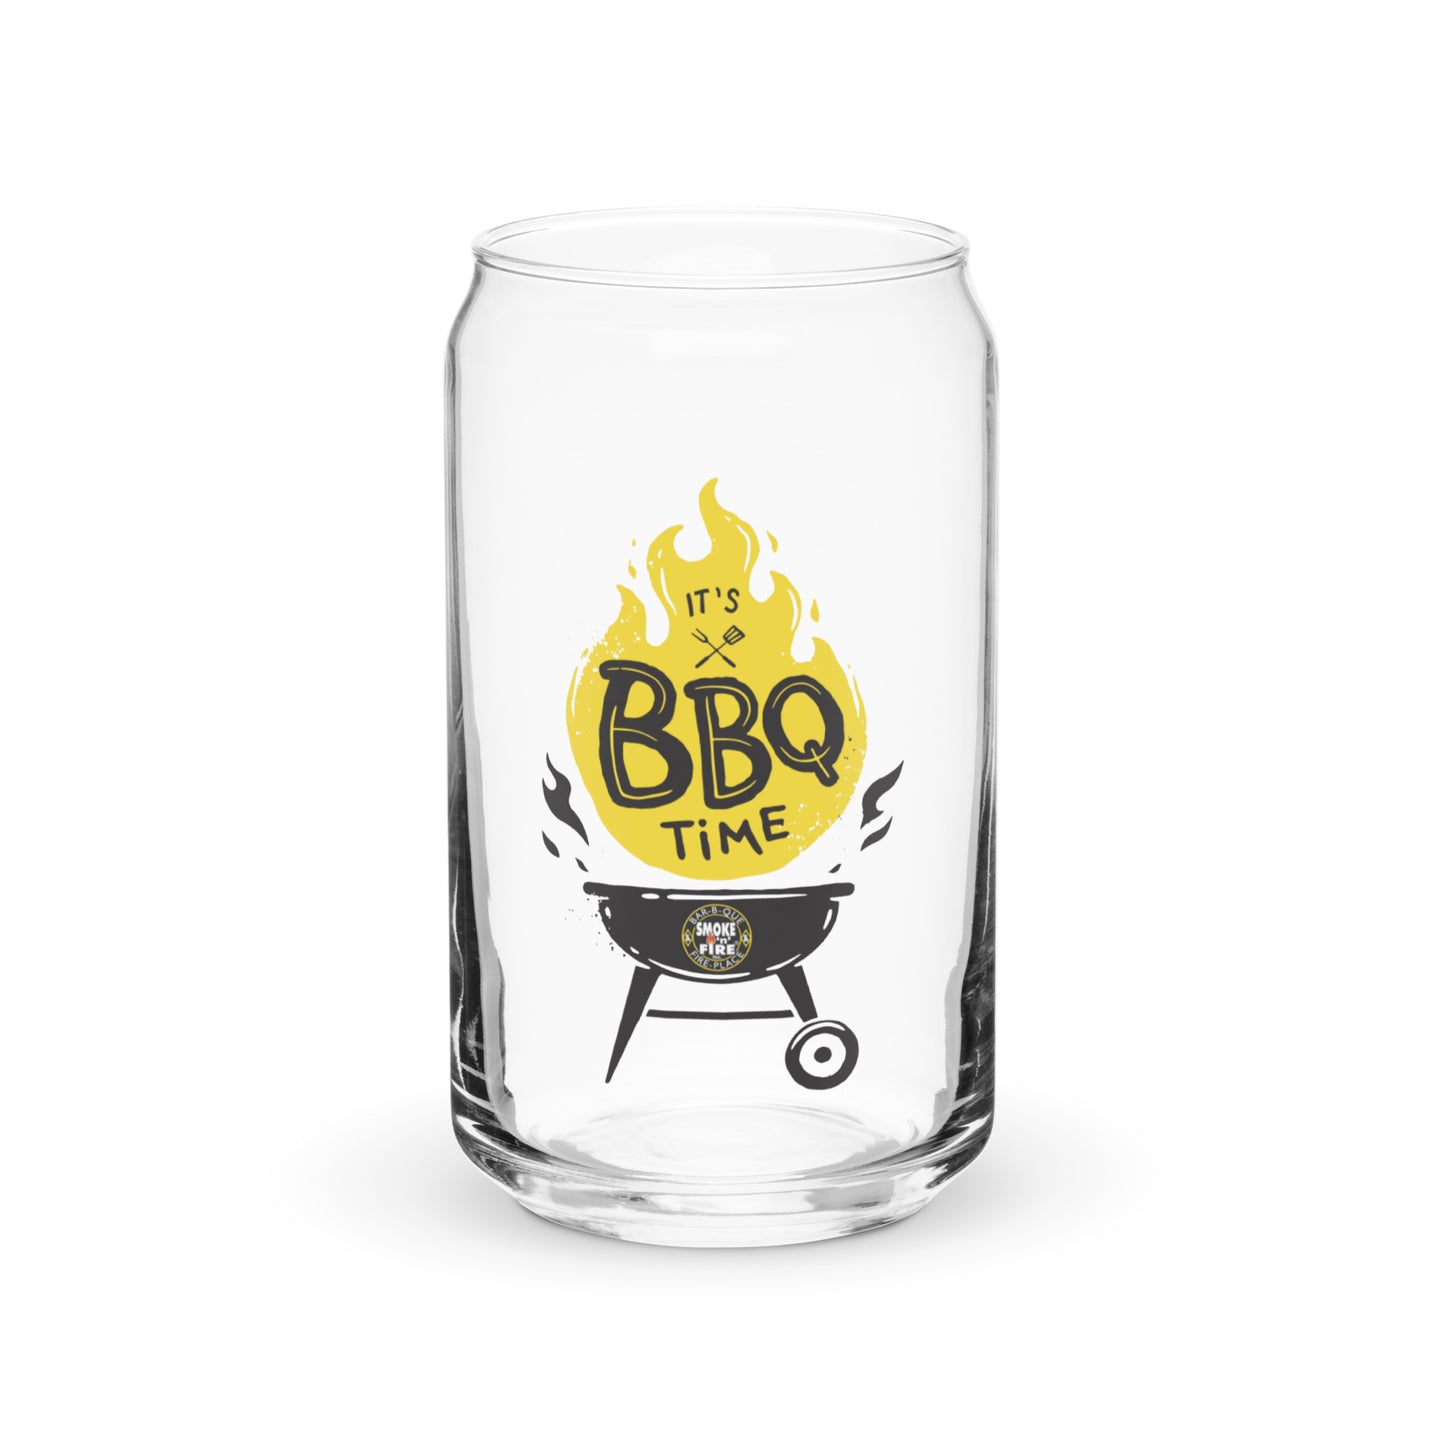 BBQ Time! - Can-shaped Glass